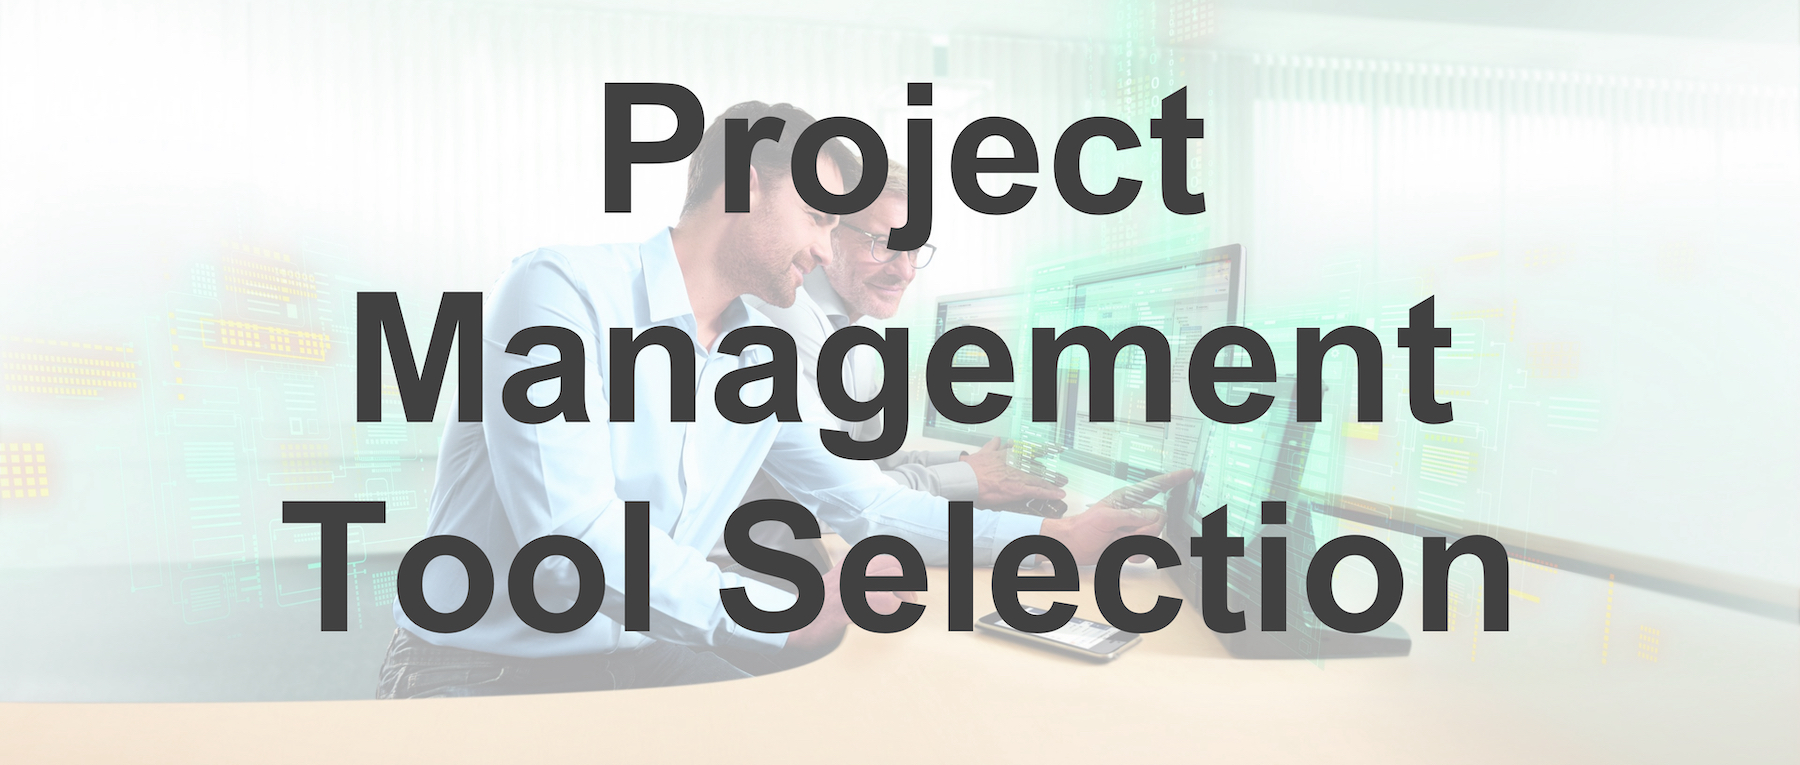 Project Management Tool Selection